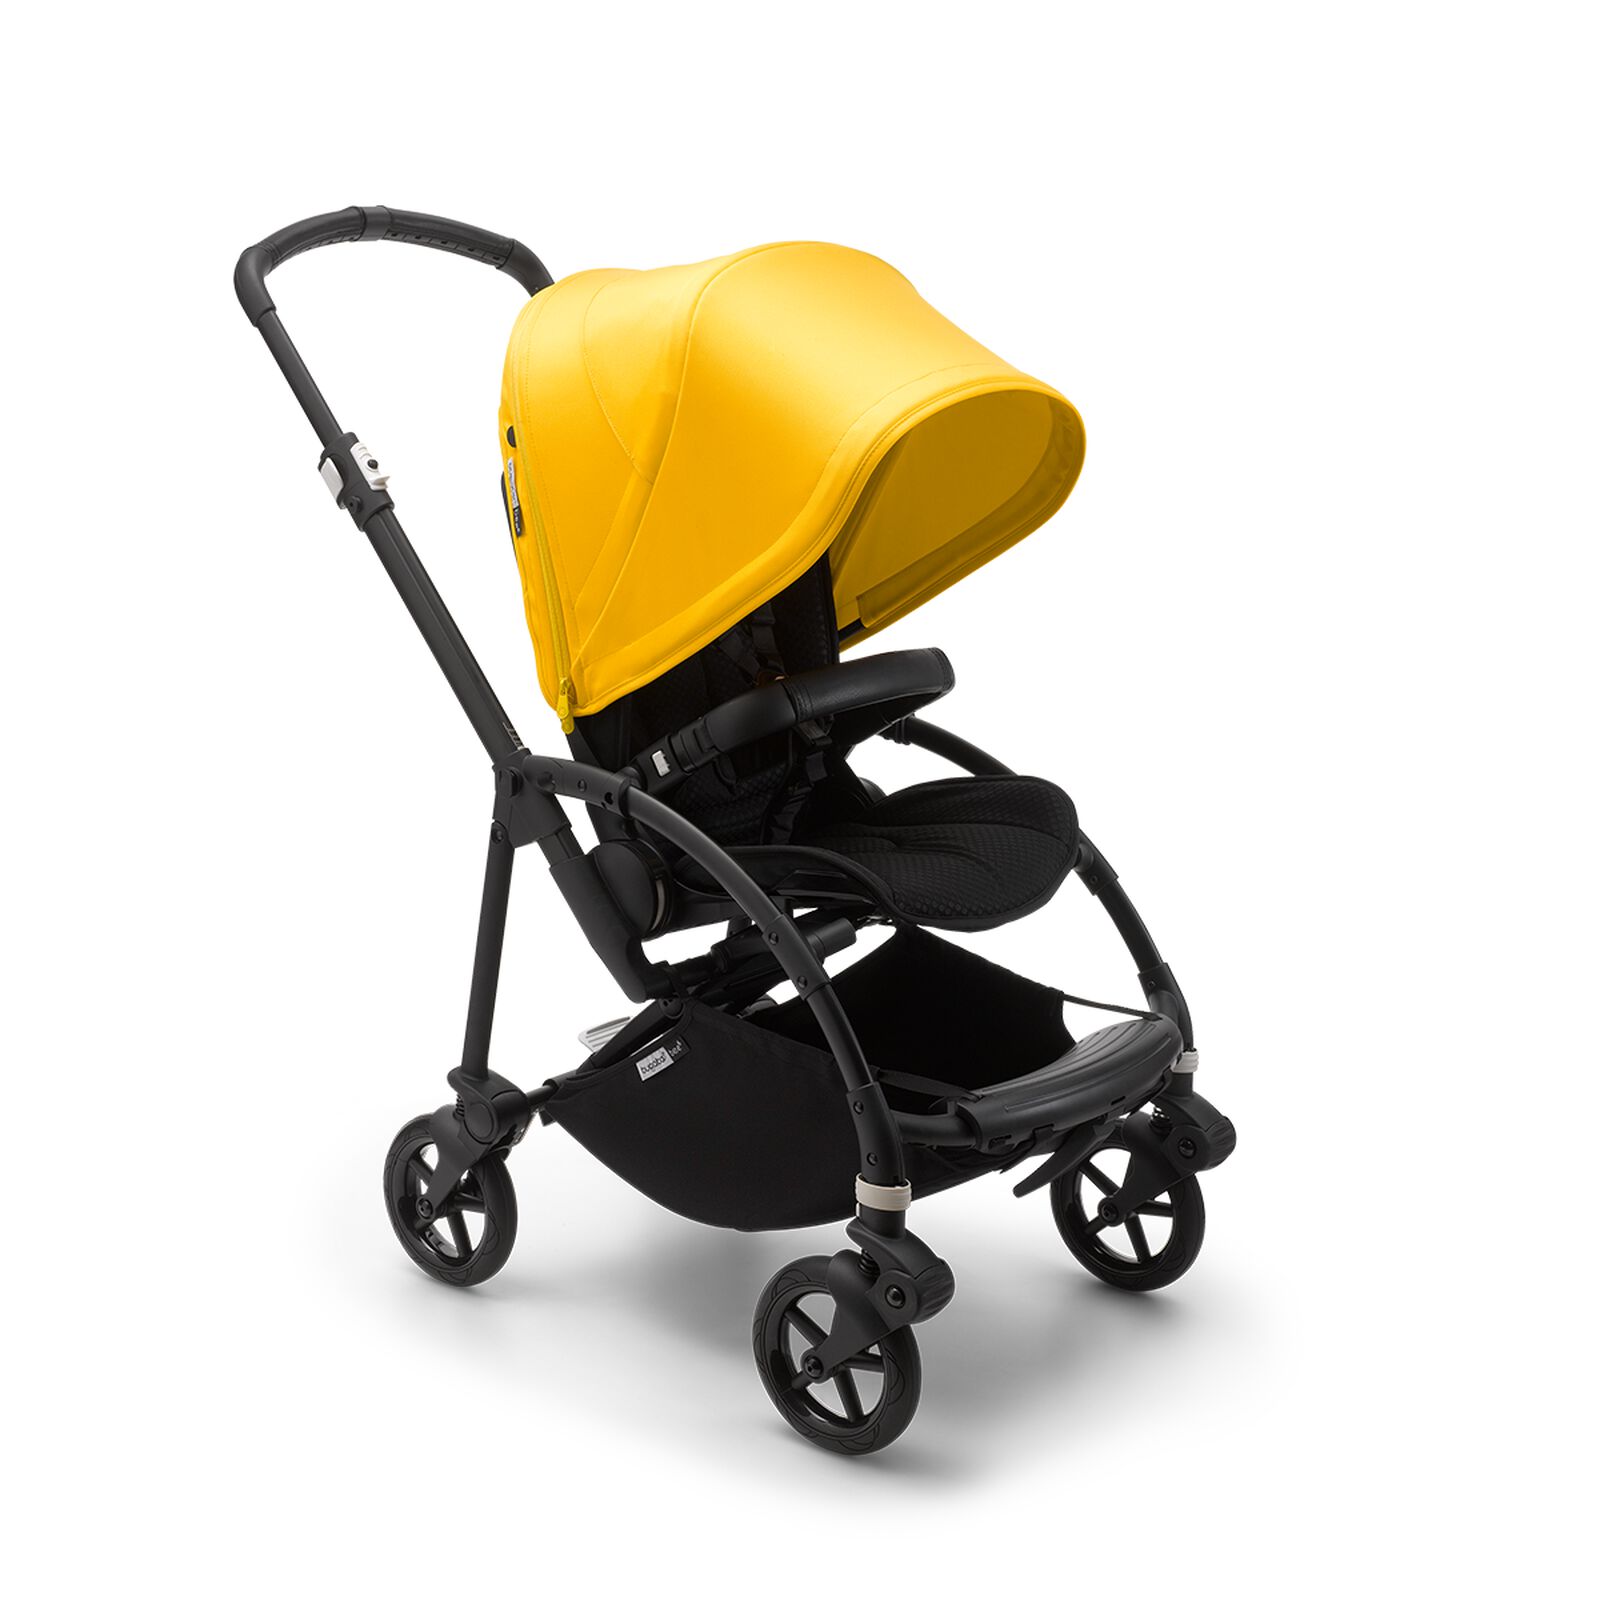 Bugaboo Bee 6 and Turtle One by Nuna bundle - View 2